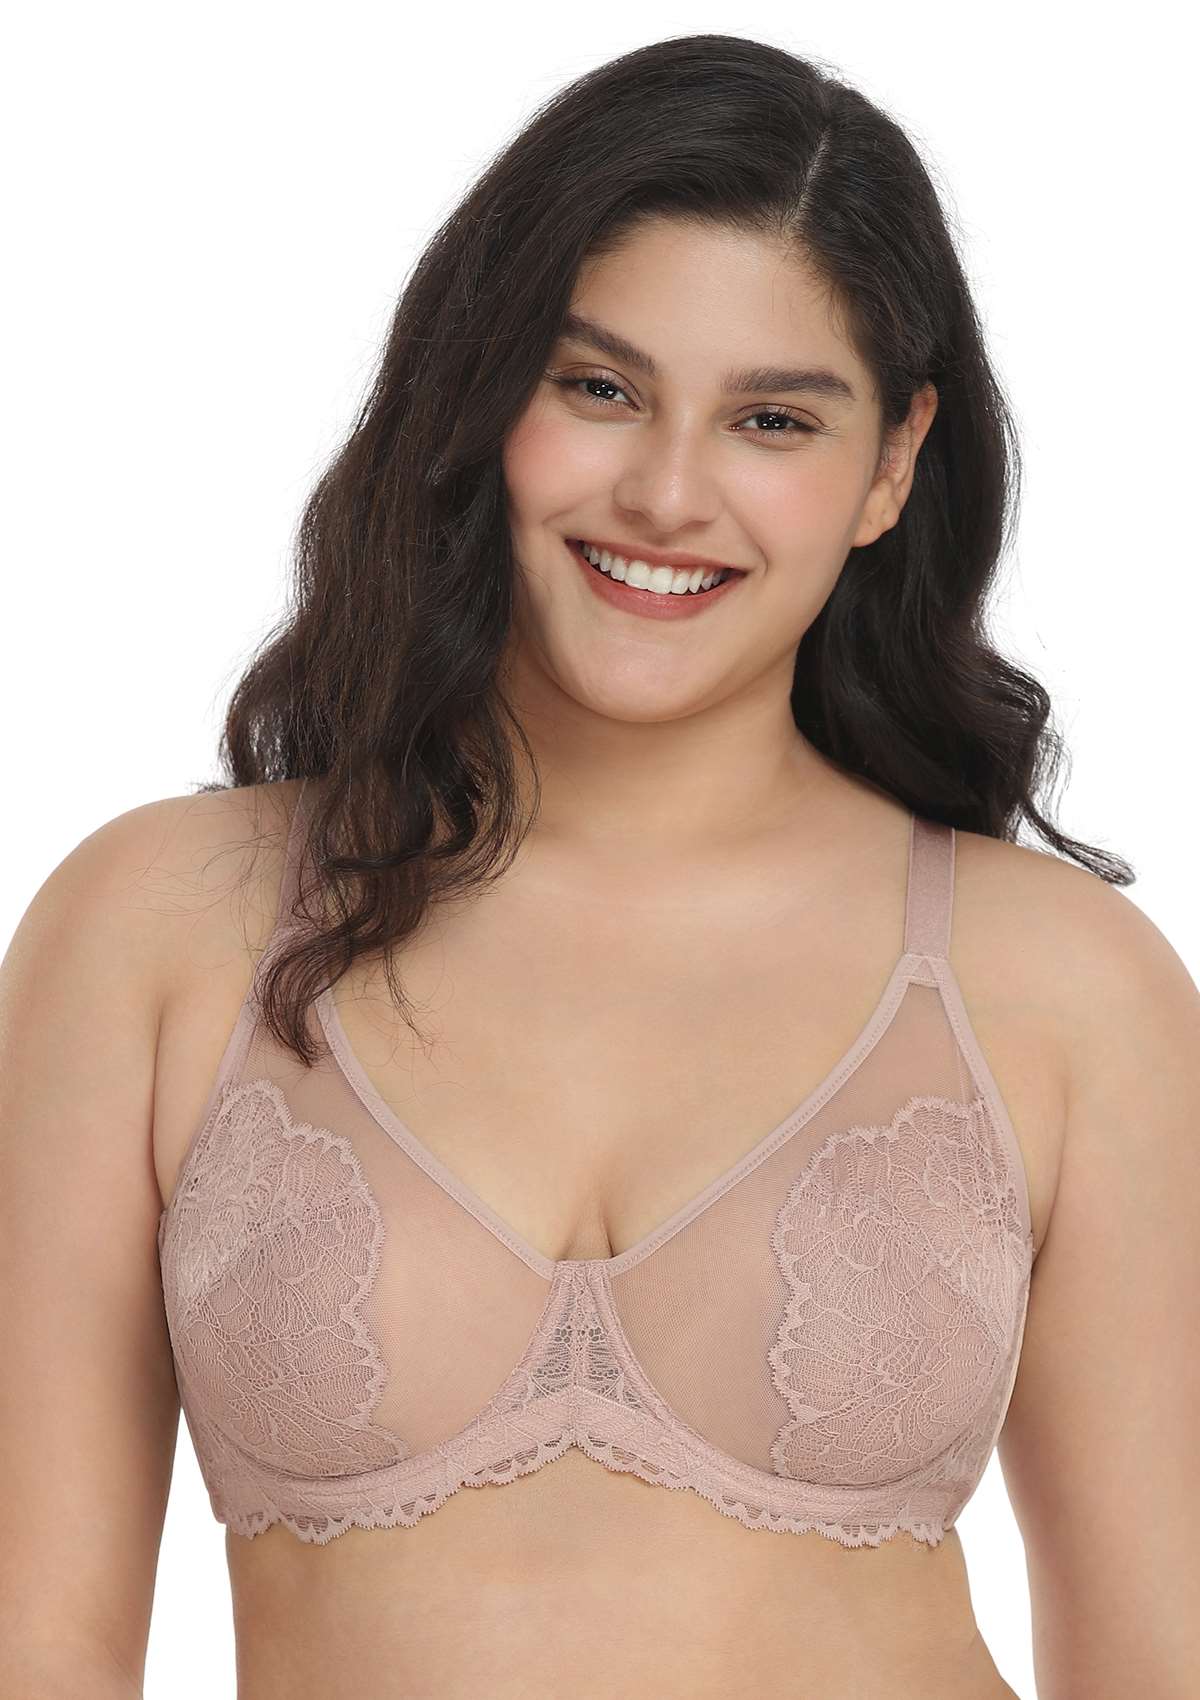 HSIA Blossom Lace Bra And Panties Set: Best Bra For Large Busts - Dark Pink / 34 / DDD/F